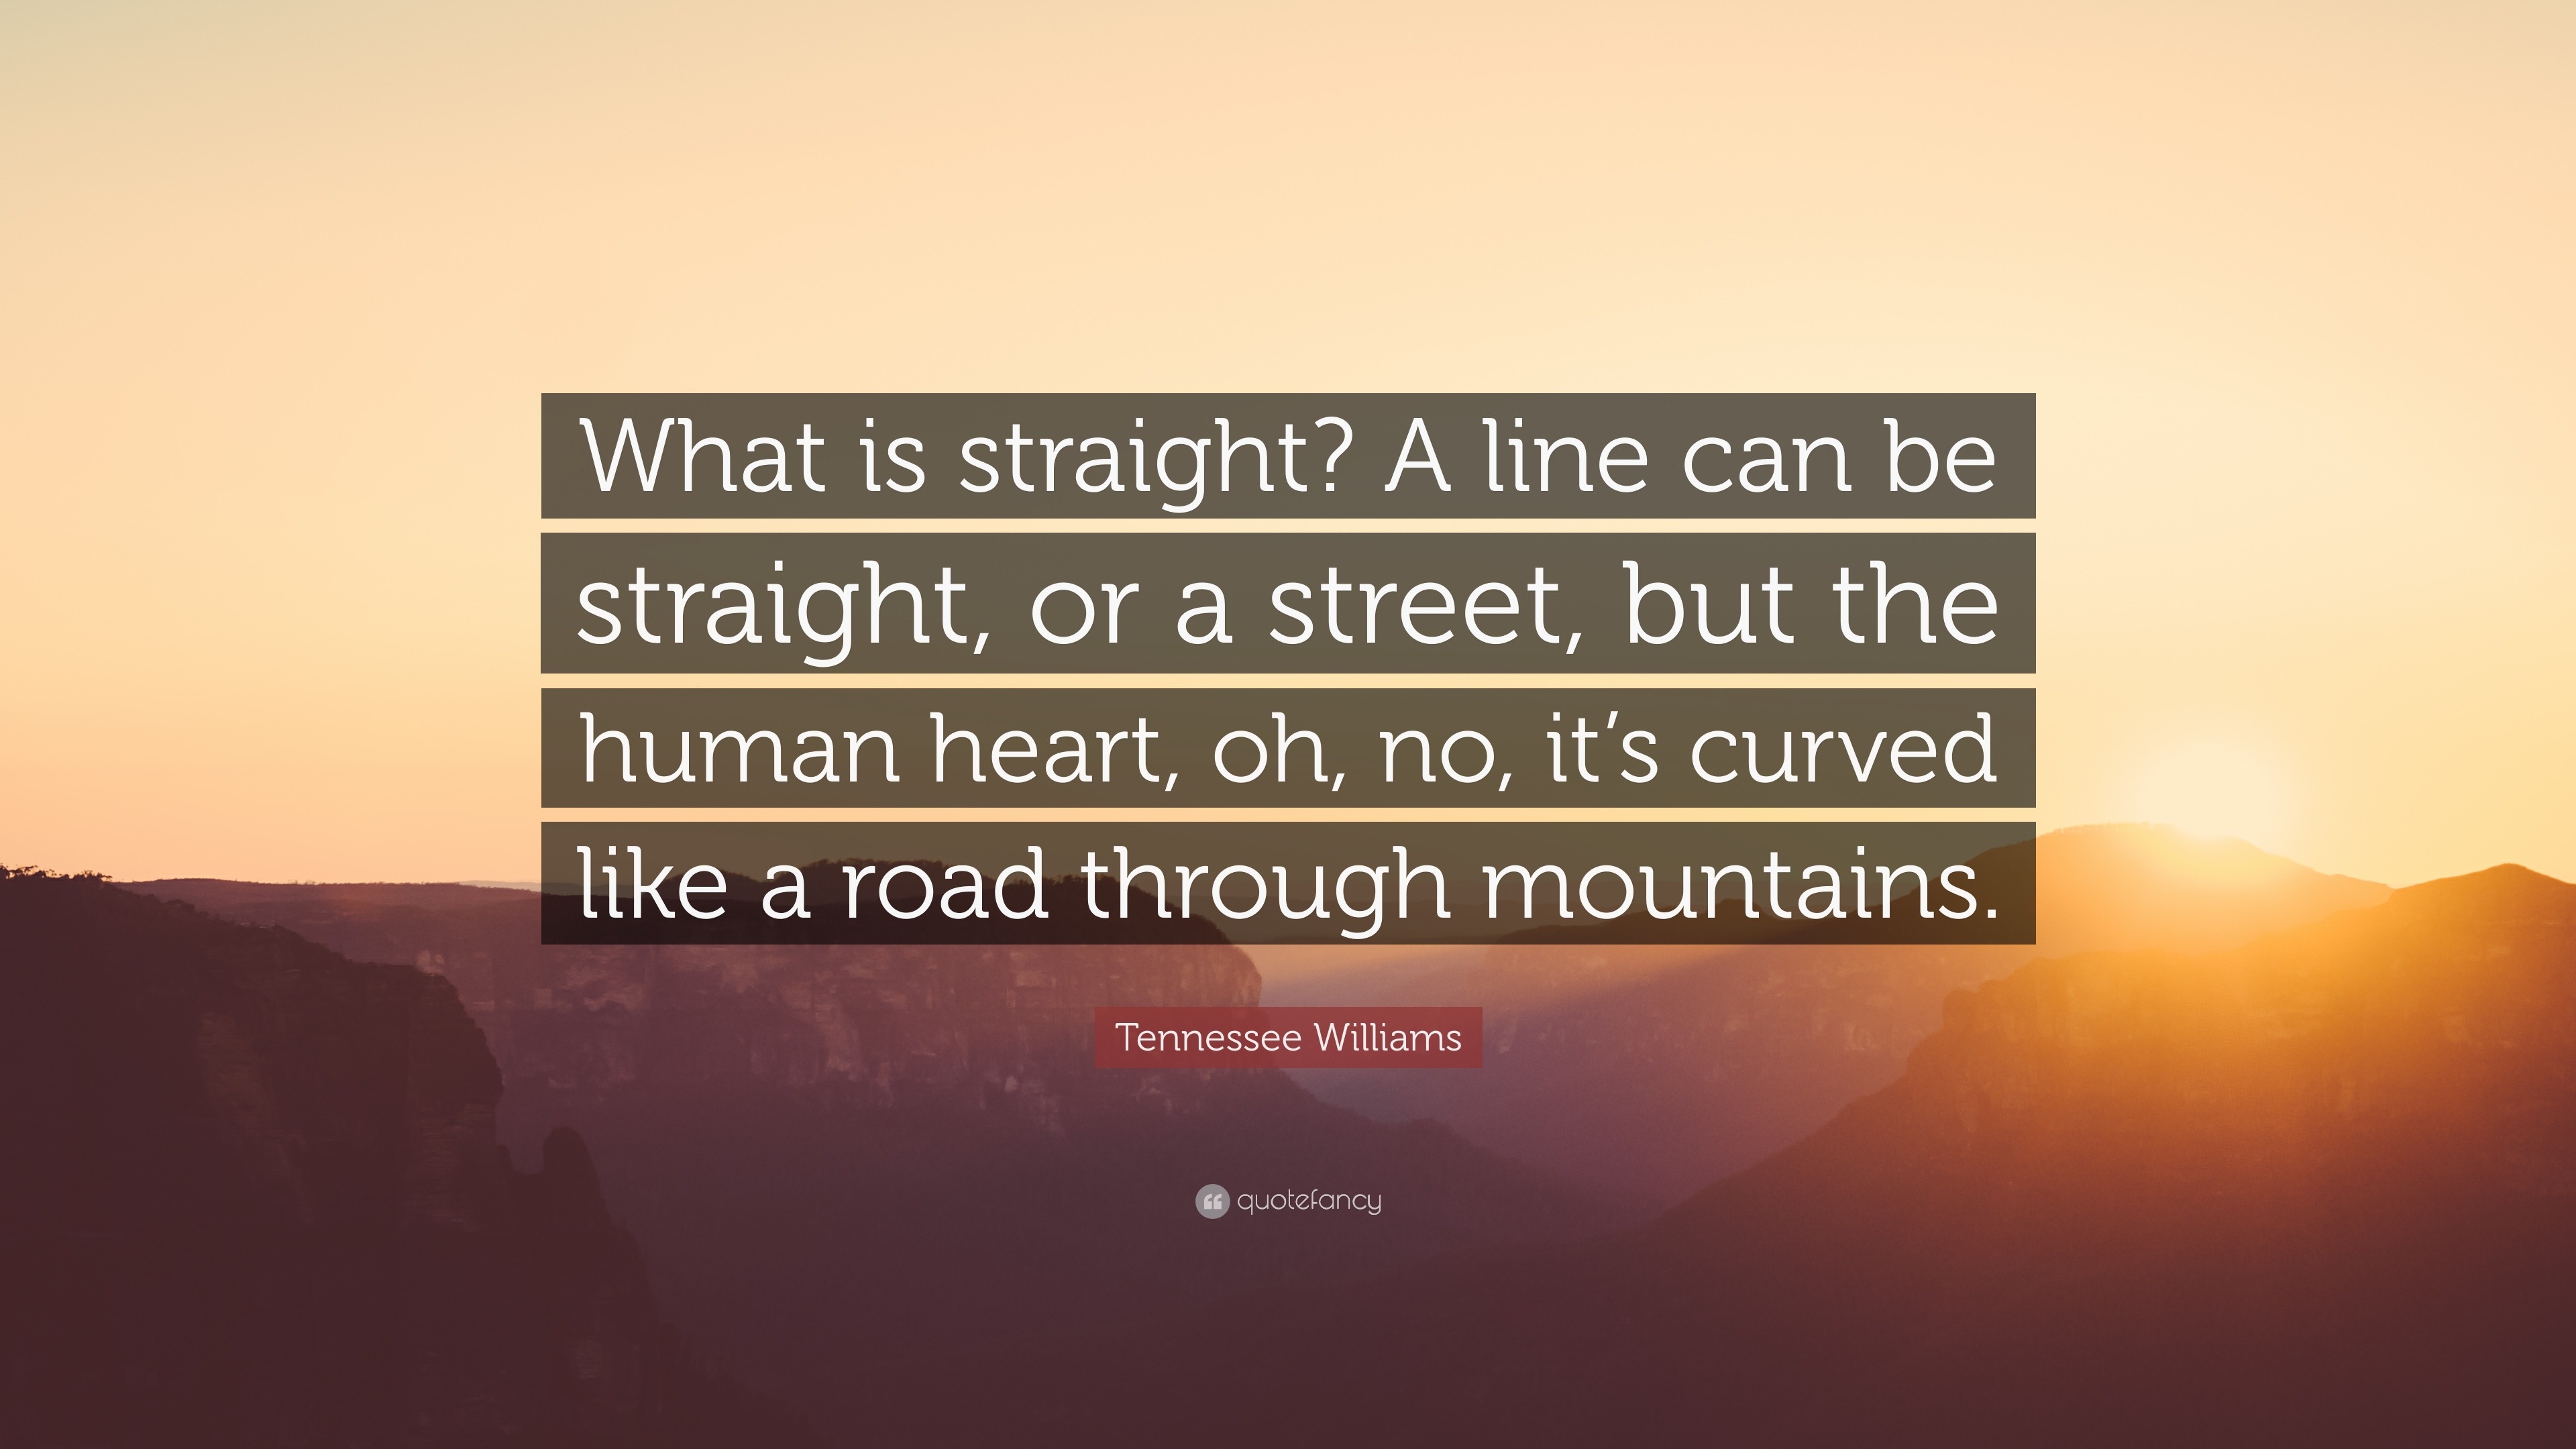 Tennessee Williams Quote: “What is straight? A line can be straight, or a street, but the human heart, oh, no, it's like a road through moun...”